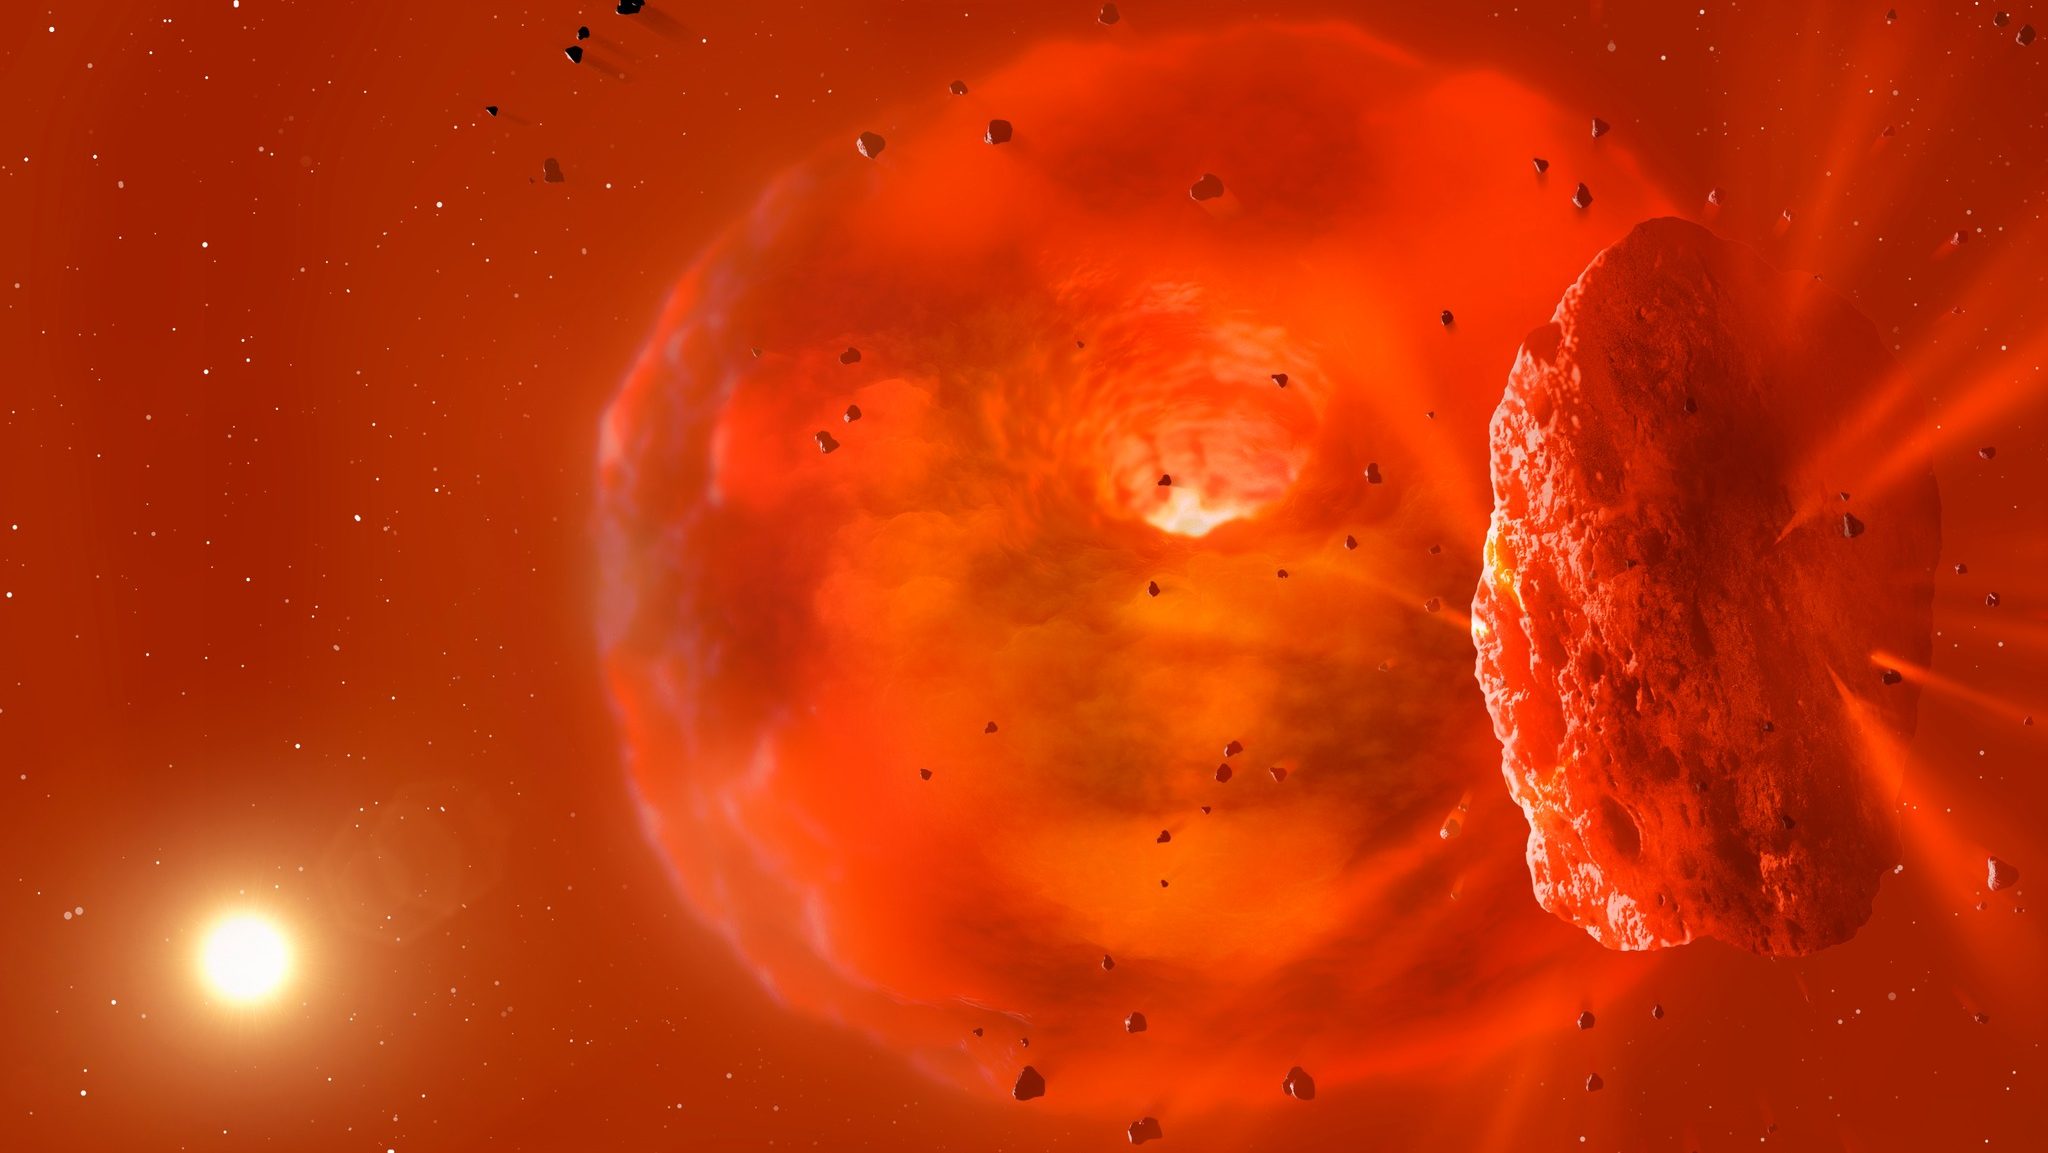 An artist's impression of a planet collision.